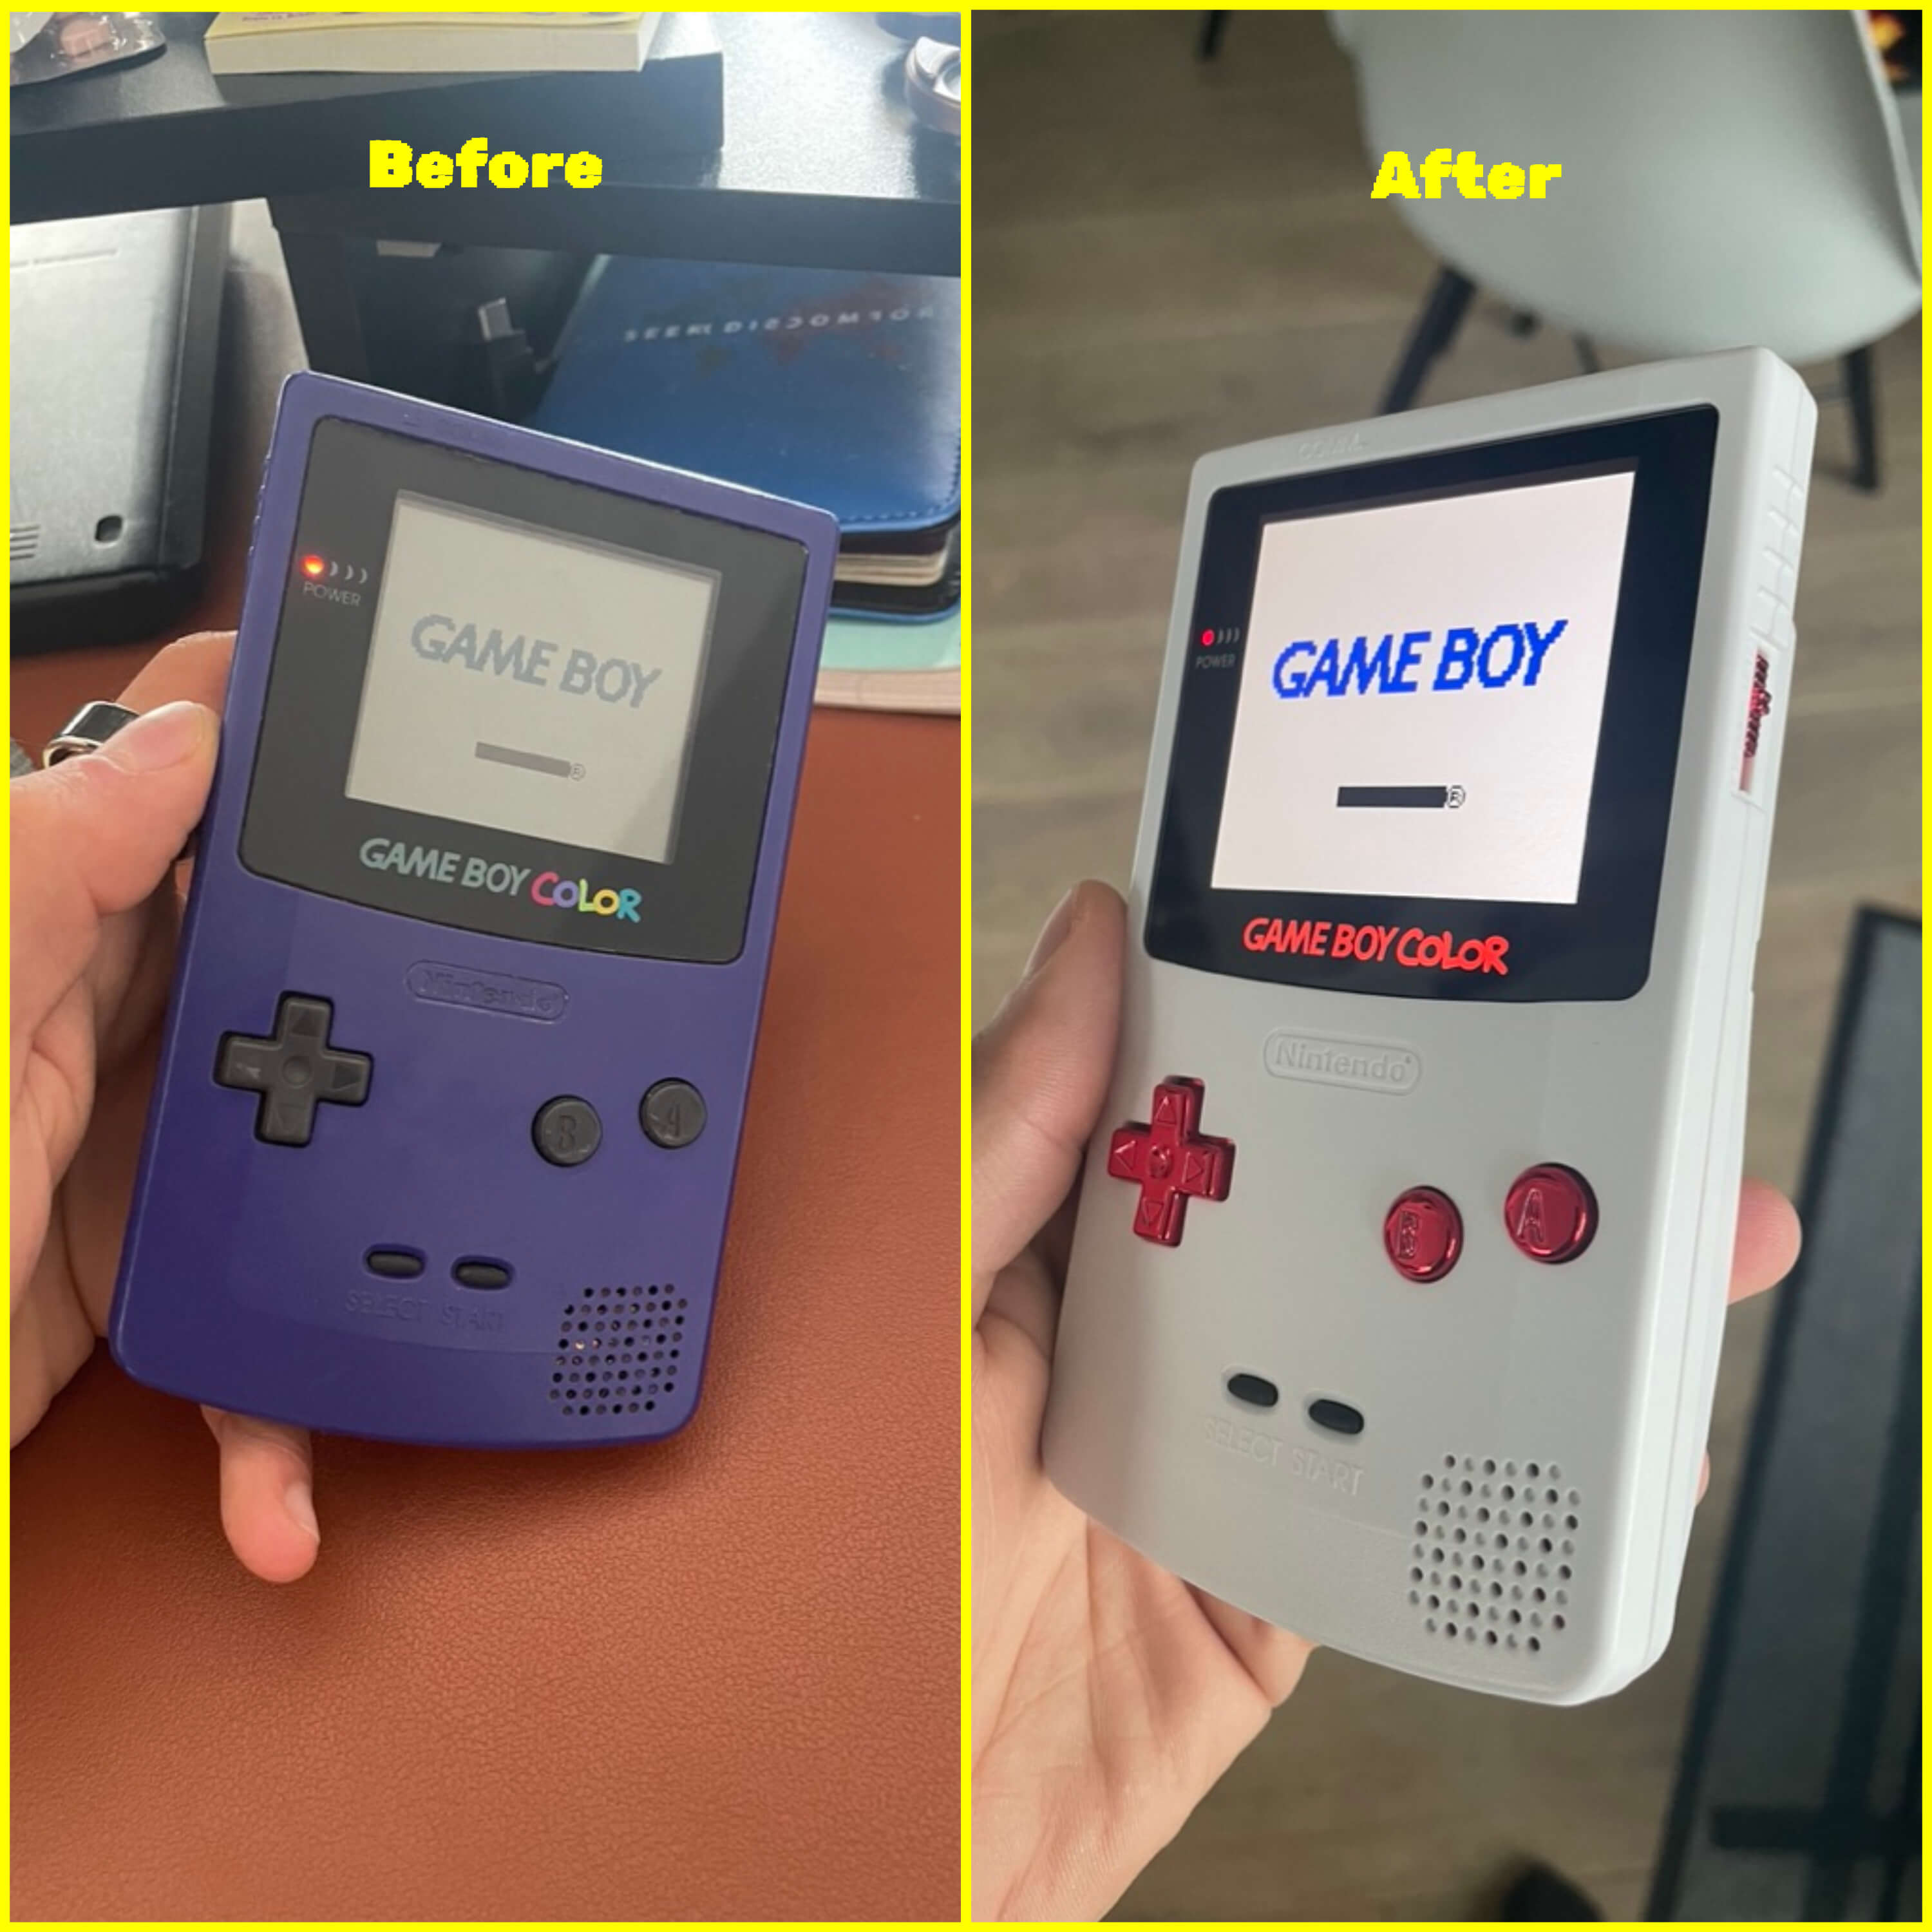 Before and after modding the GameBoy Color console